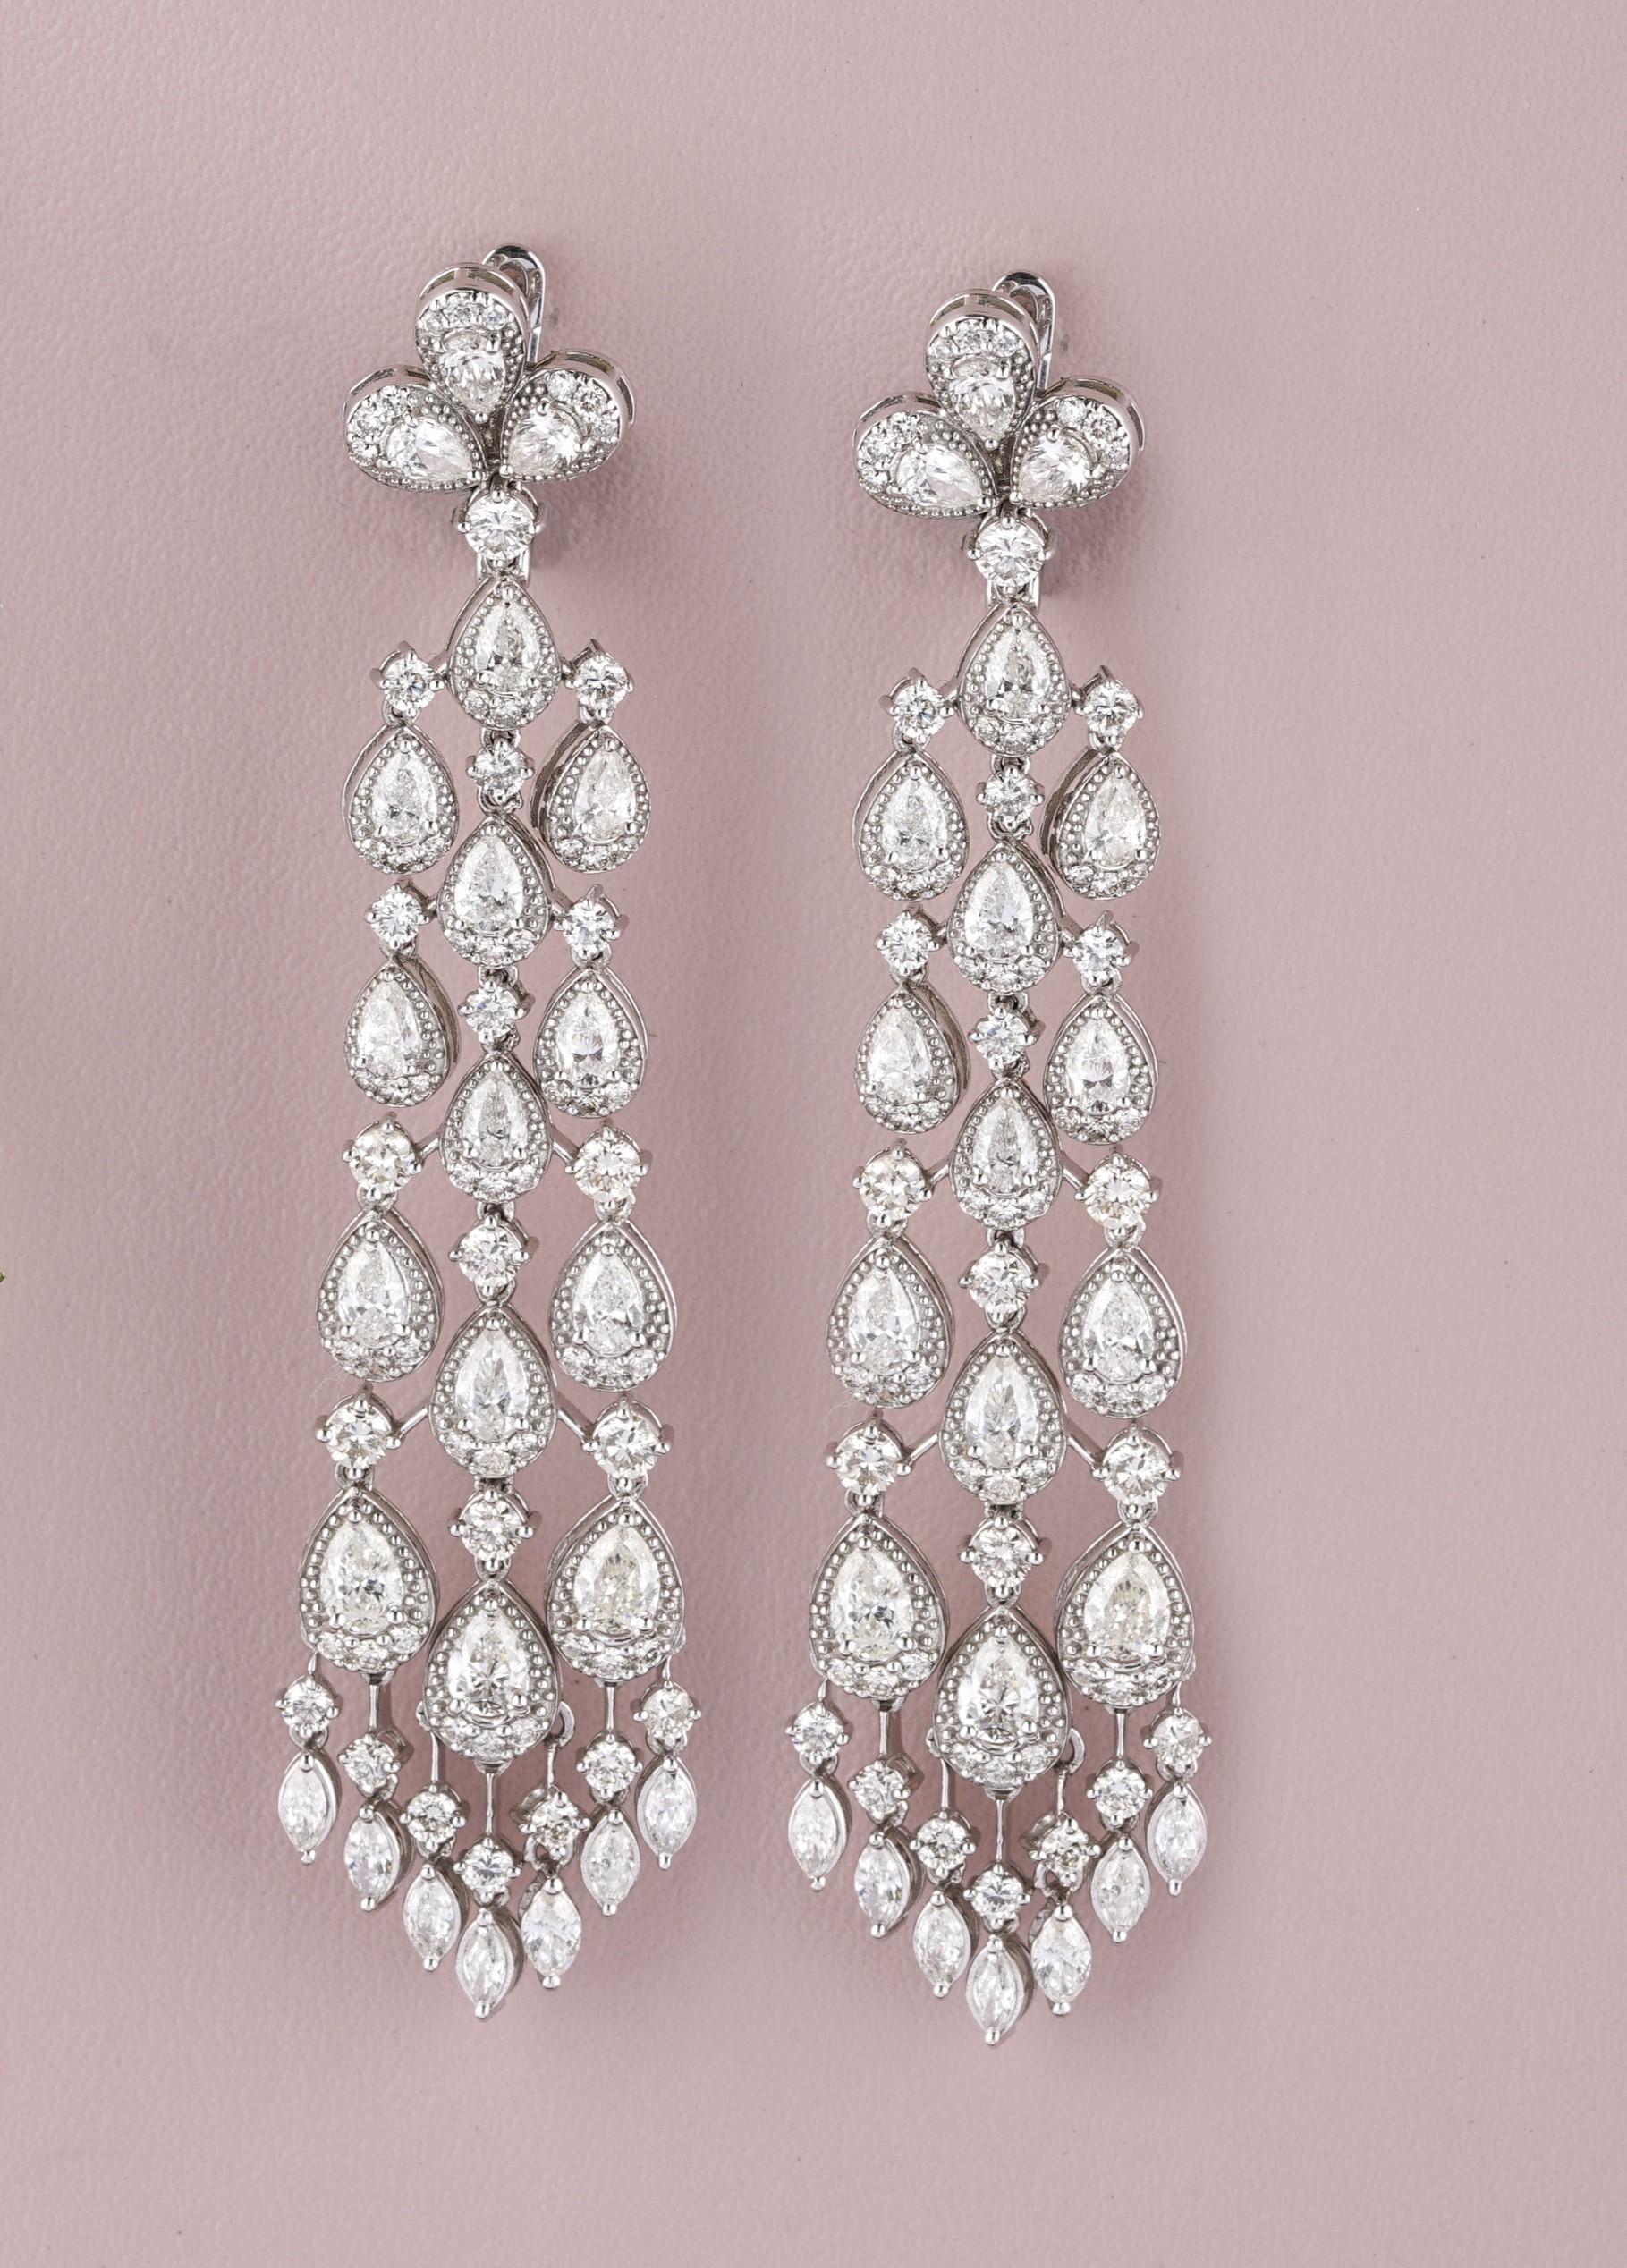 Victorian earrings with natural pears and marquise diamonds are a type of jewelry that features an antique-inspired design. The earrings are made of 18K solid gold and feature natural pear-shaped diamonds as well as marquise-cut diamonds. They offer